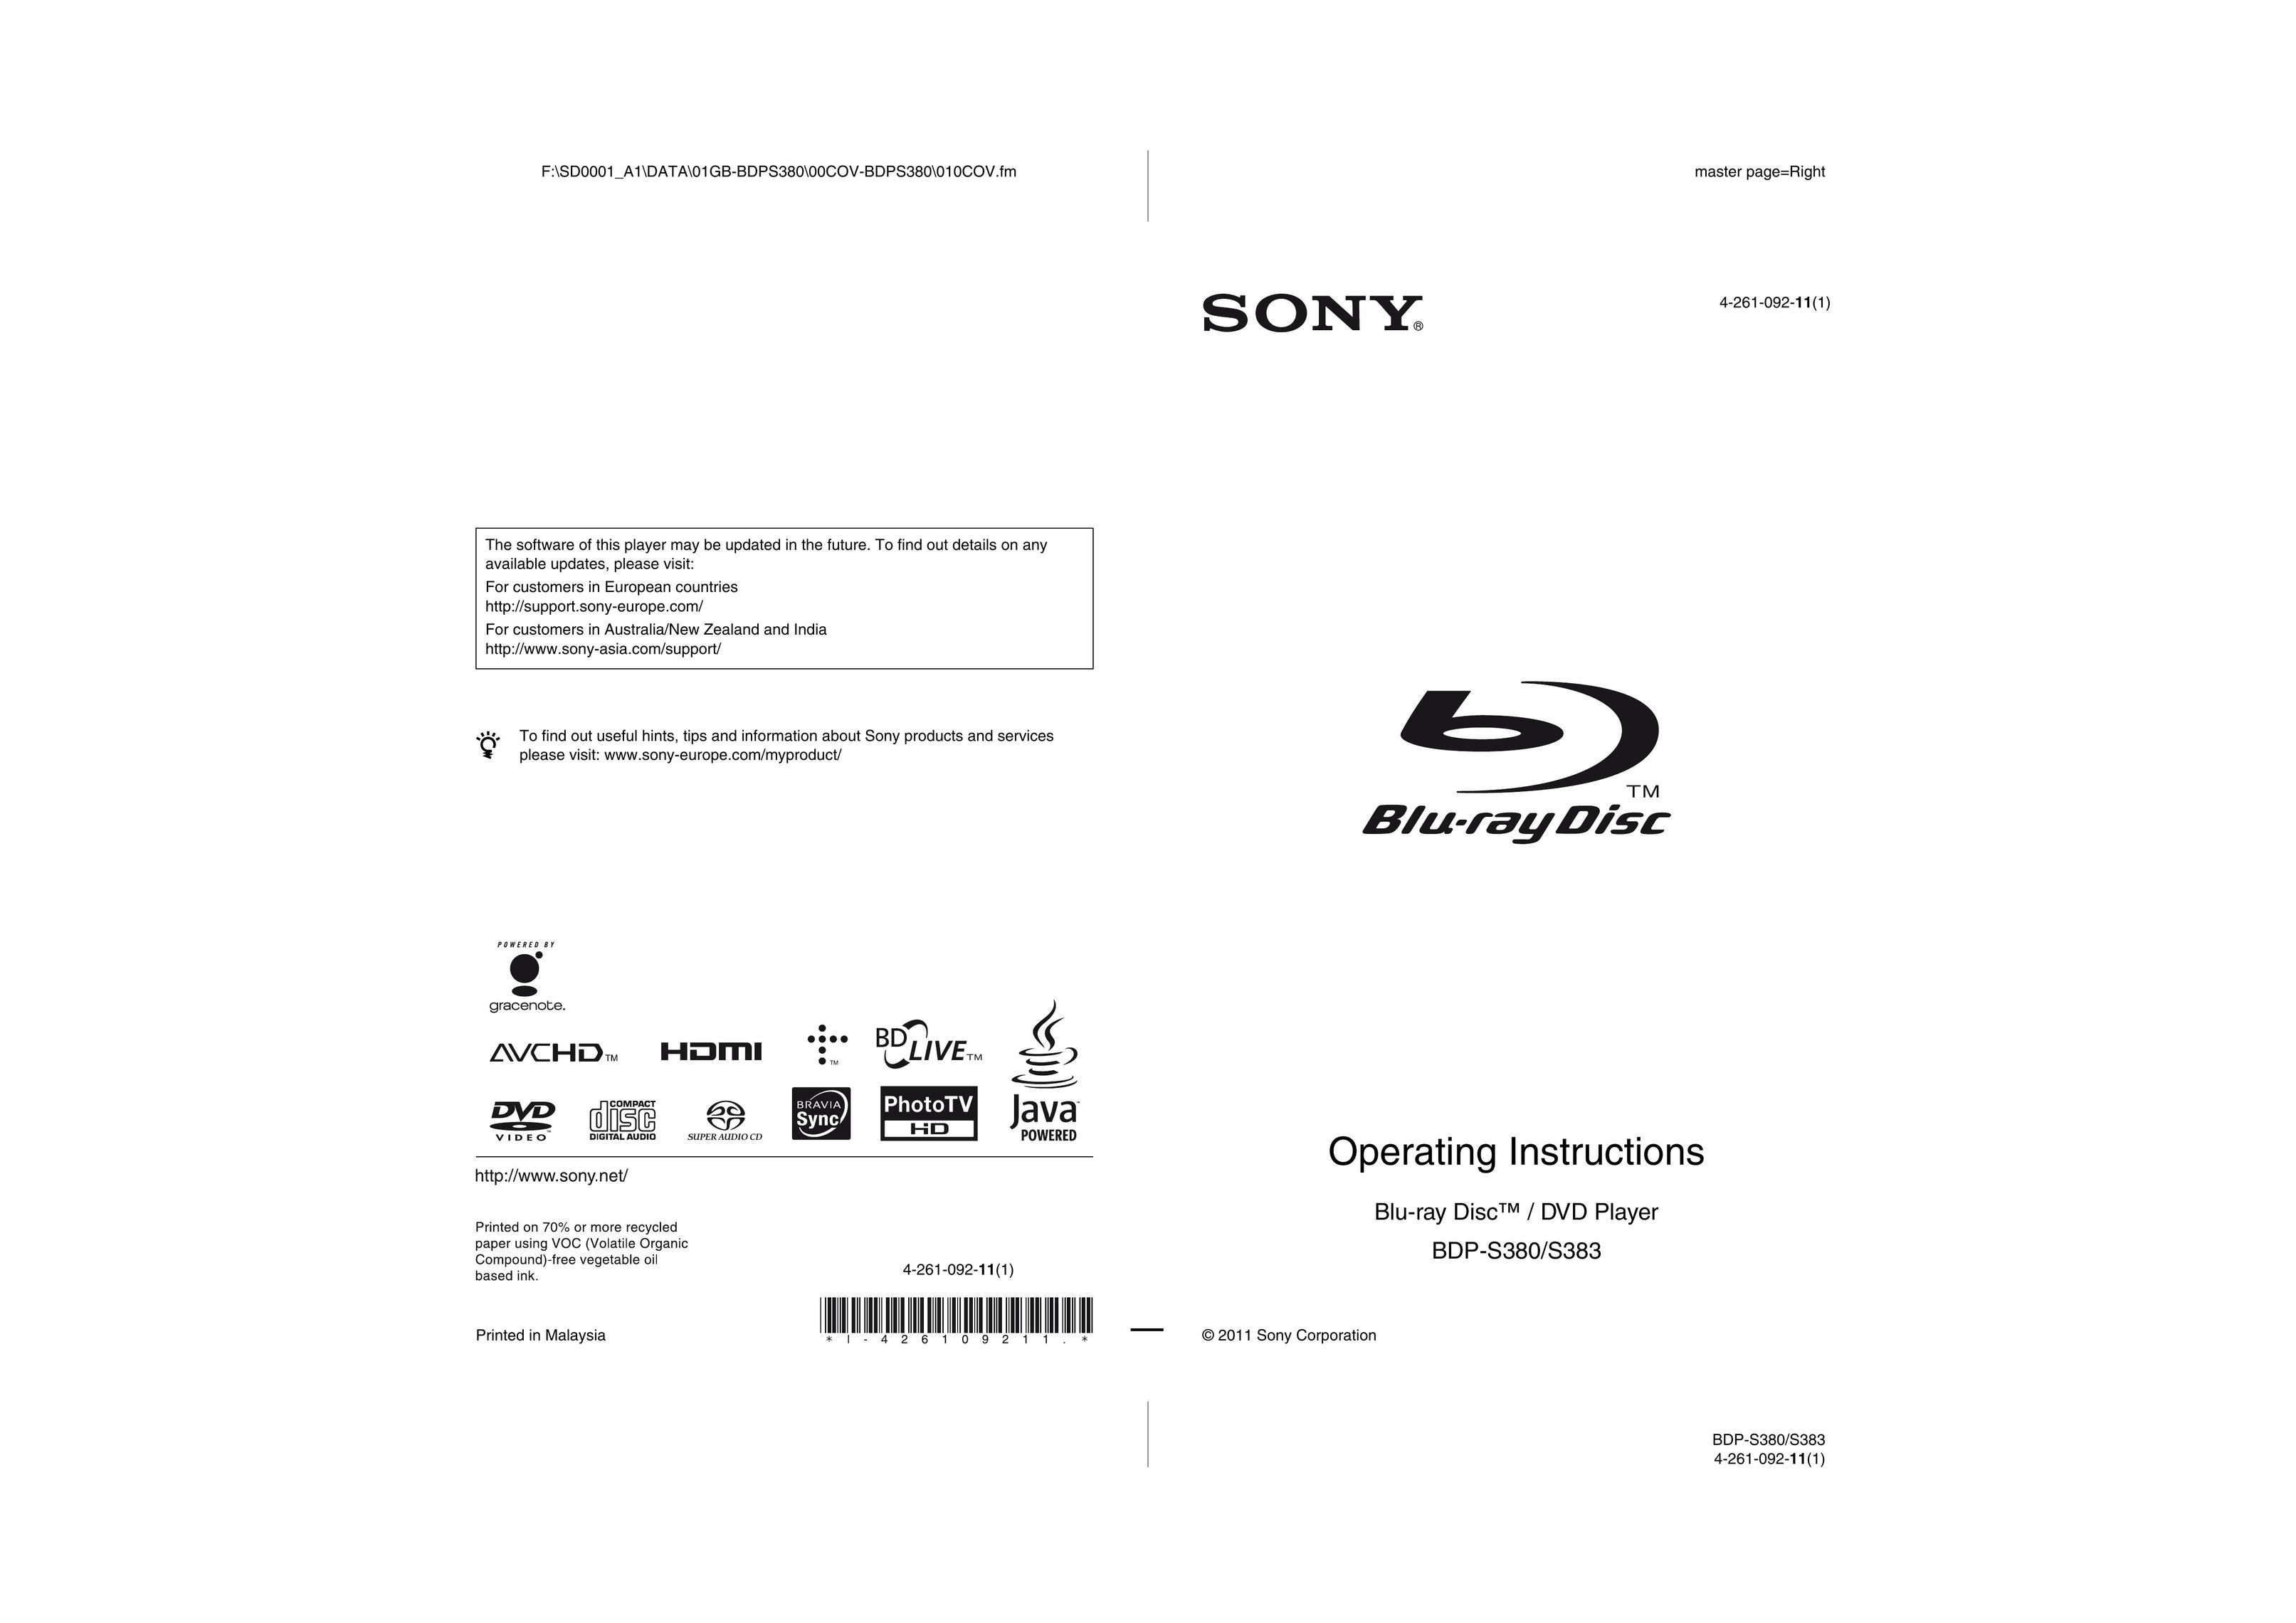 Sony BDP-S380/S383 Blu-ray Player User Manual